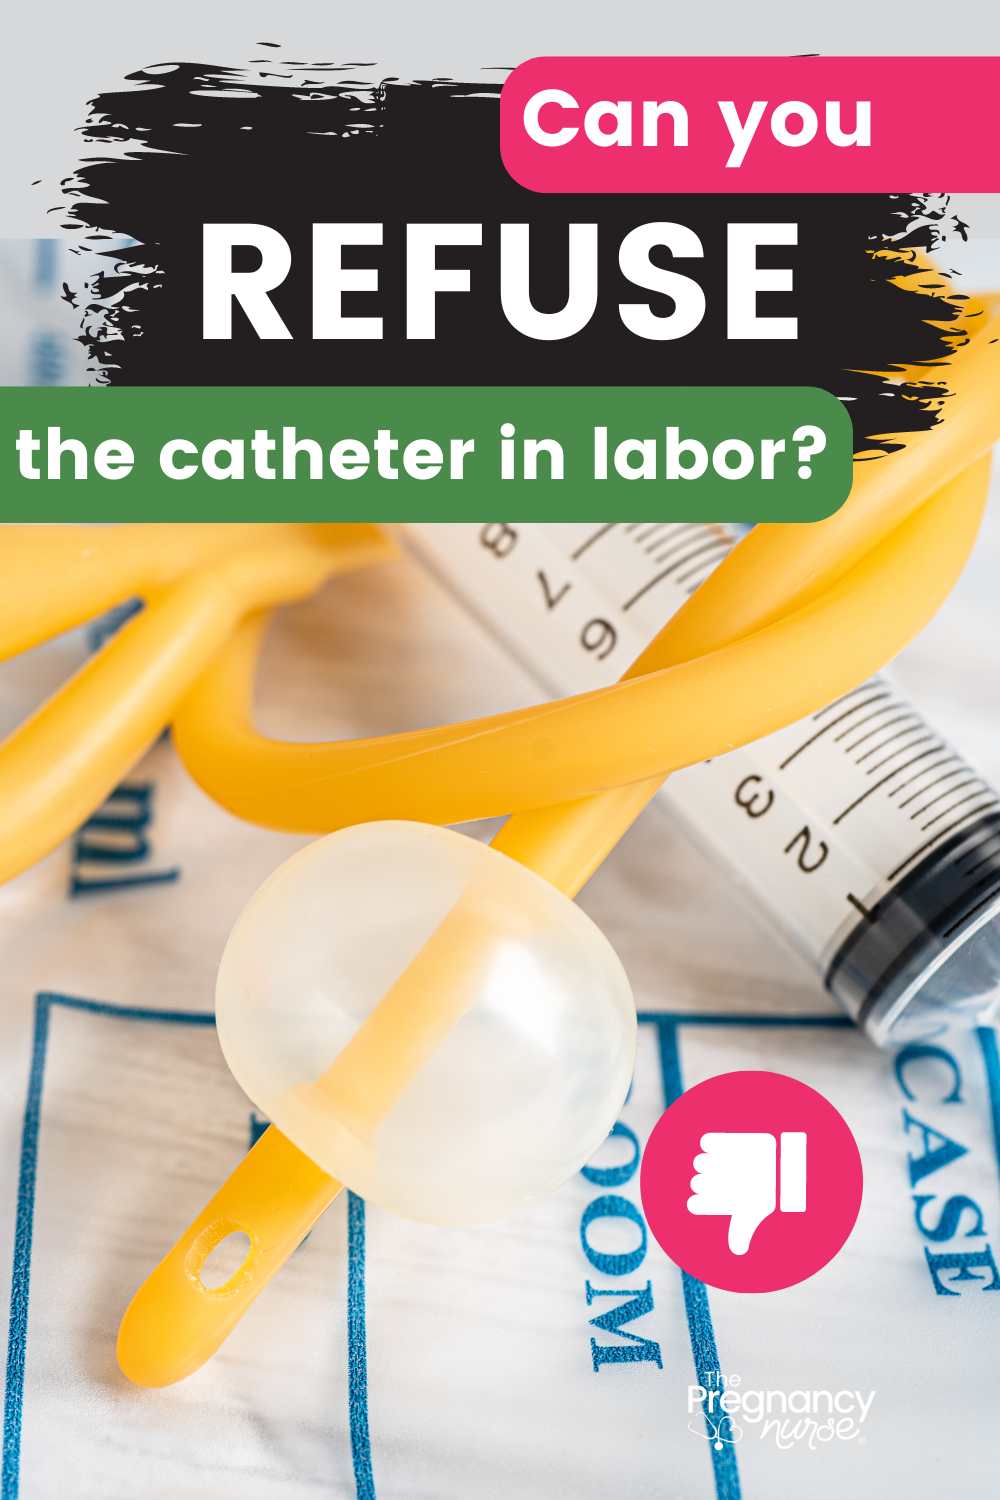 Ever wondered why a urinary catheter is used during labor? Dive deep into the reasons, risks and your rights in refusing. Find out about alternatives and more, all from an experienced labor and delivery nurse.